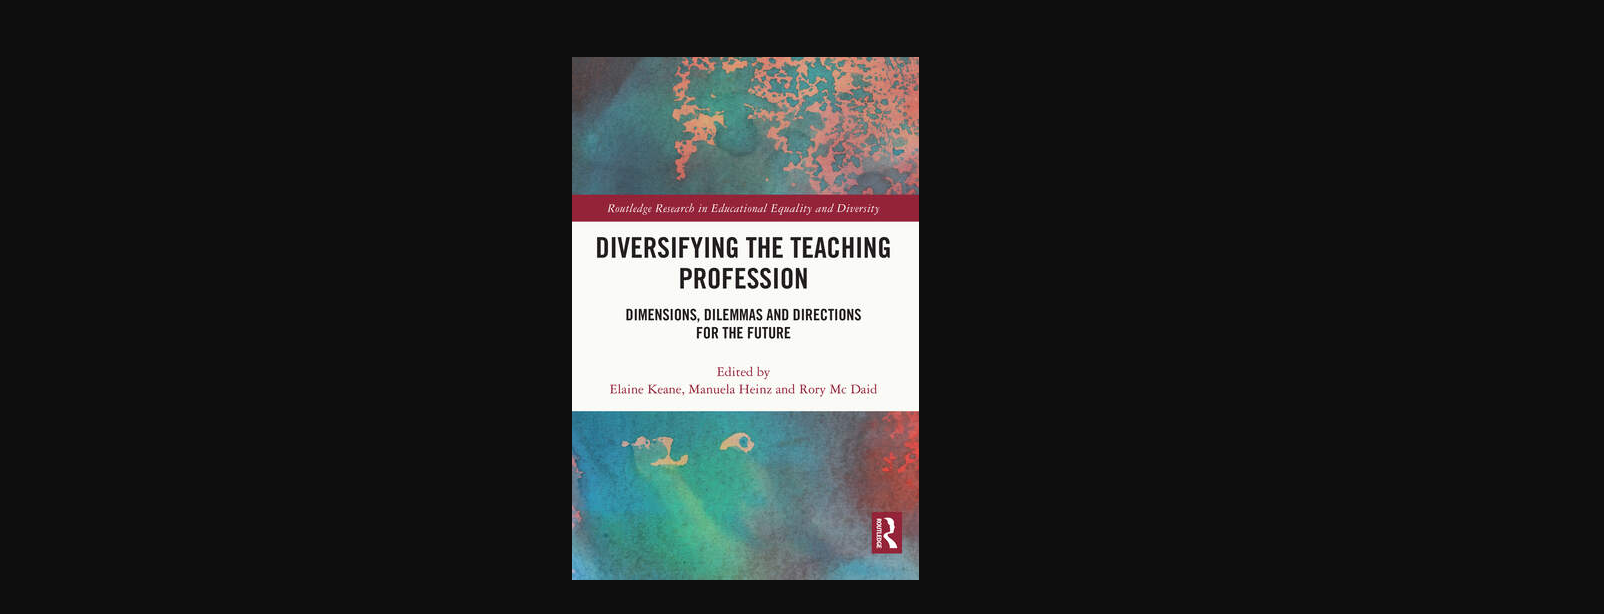 Diversifying the Teaching Profession book cover